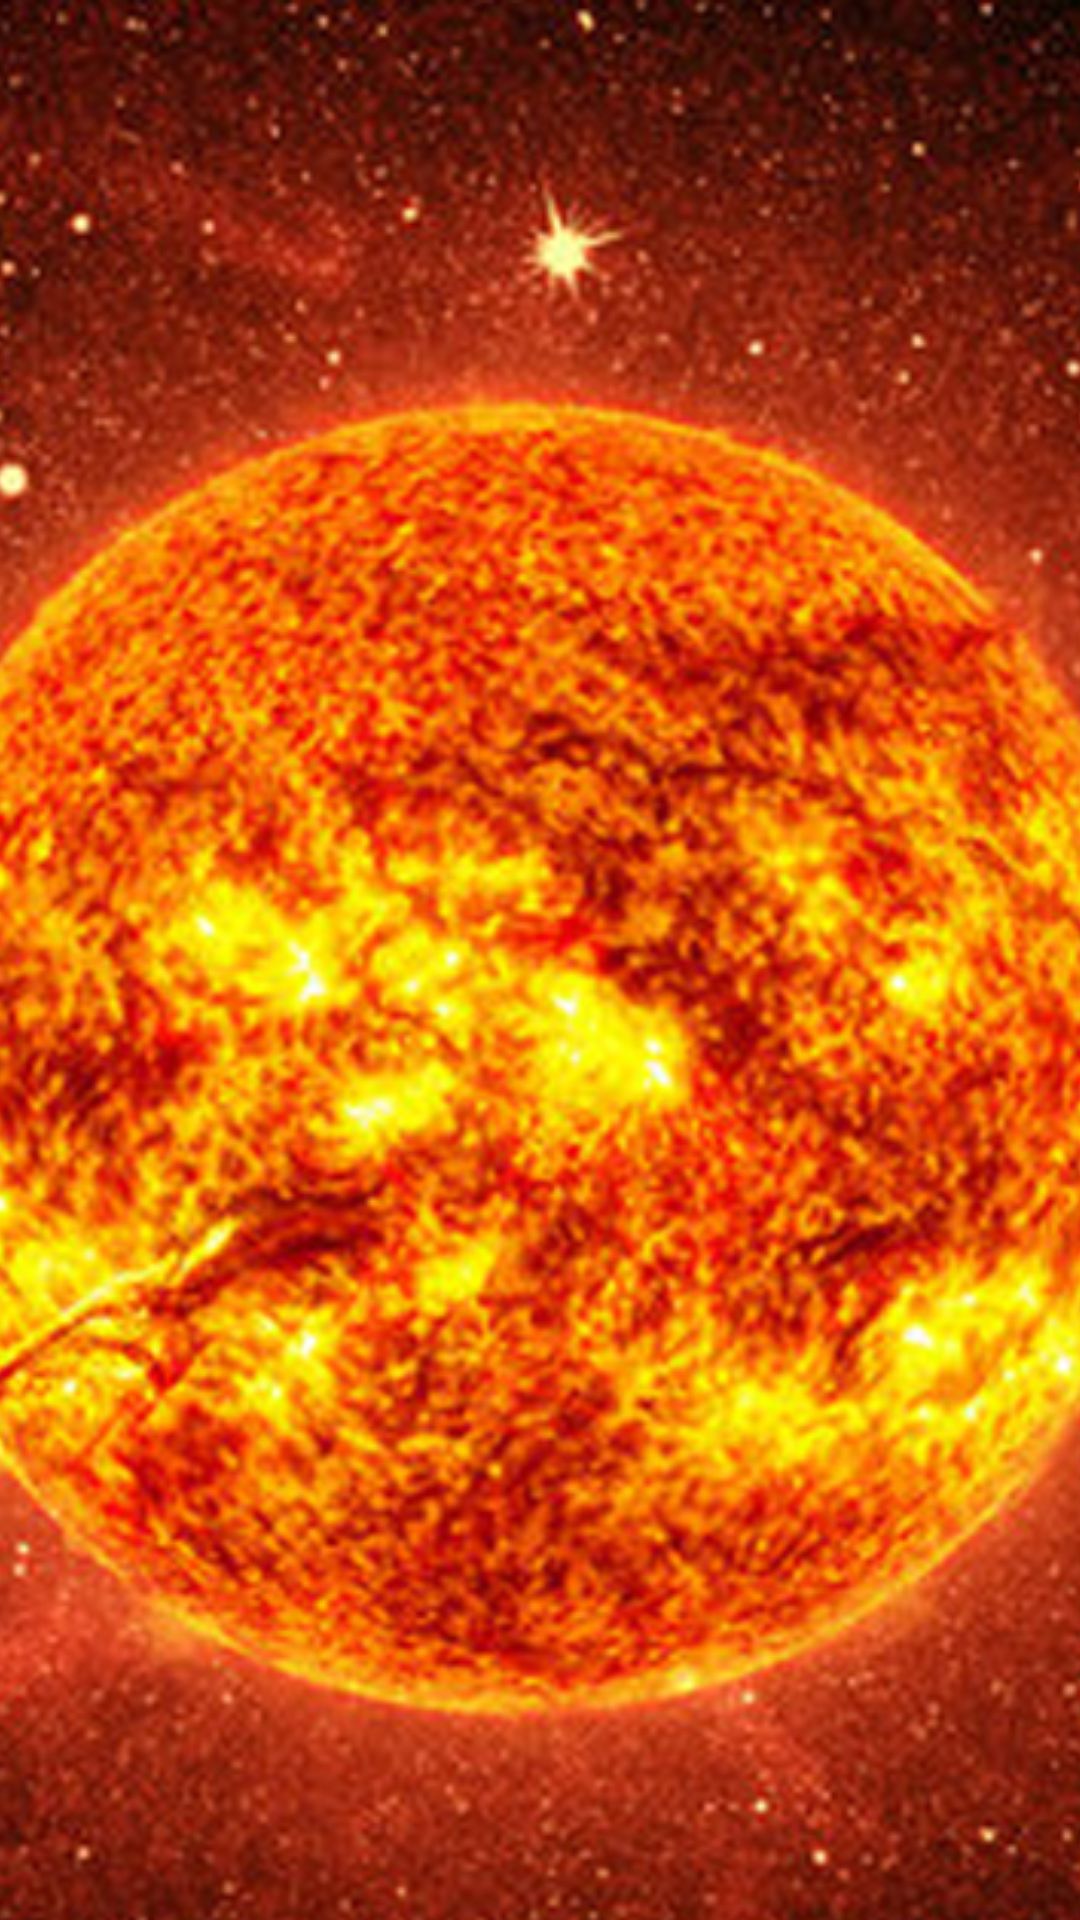 Aditya L1 mission will study the Sun?  Find out what else will work.